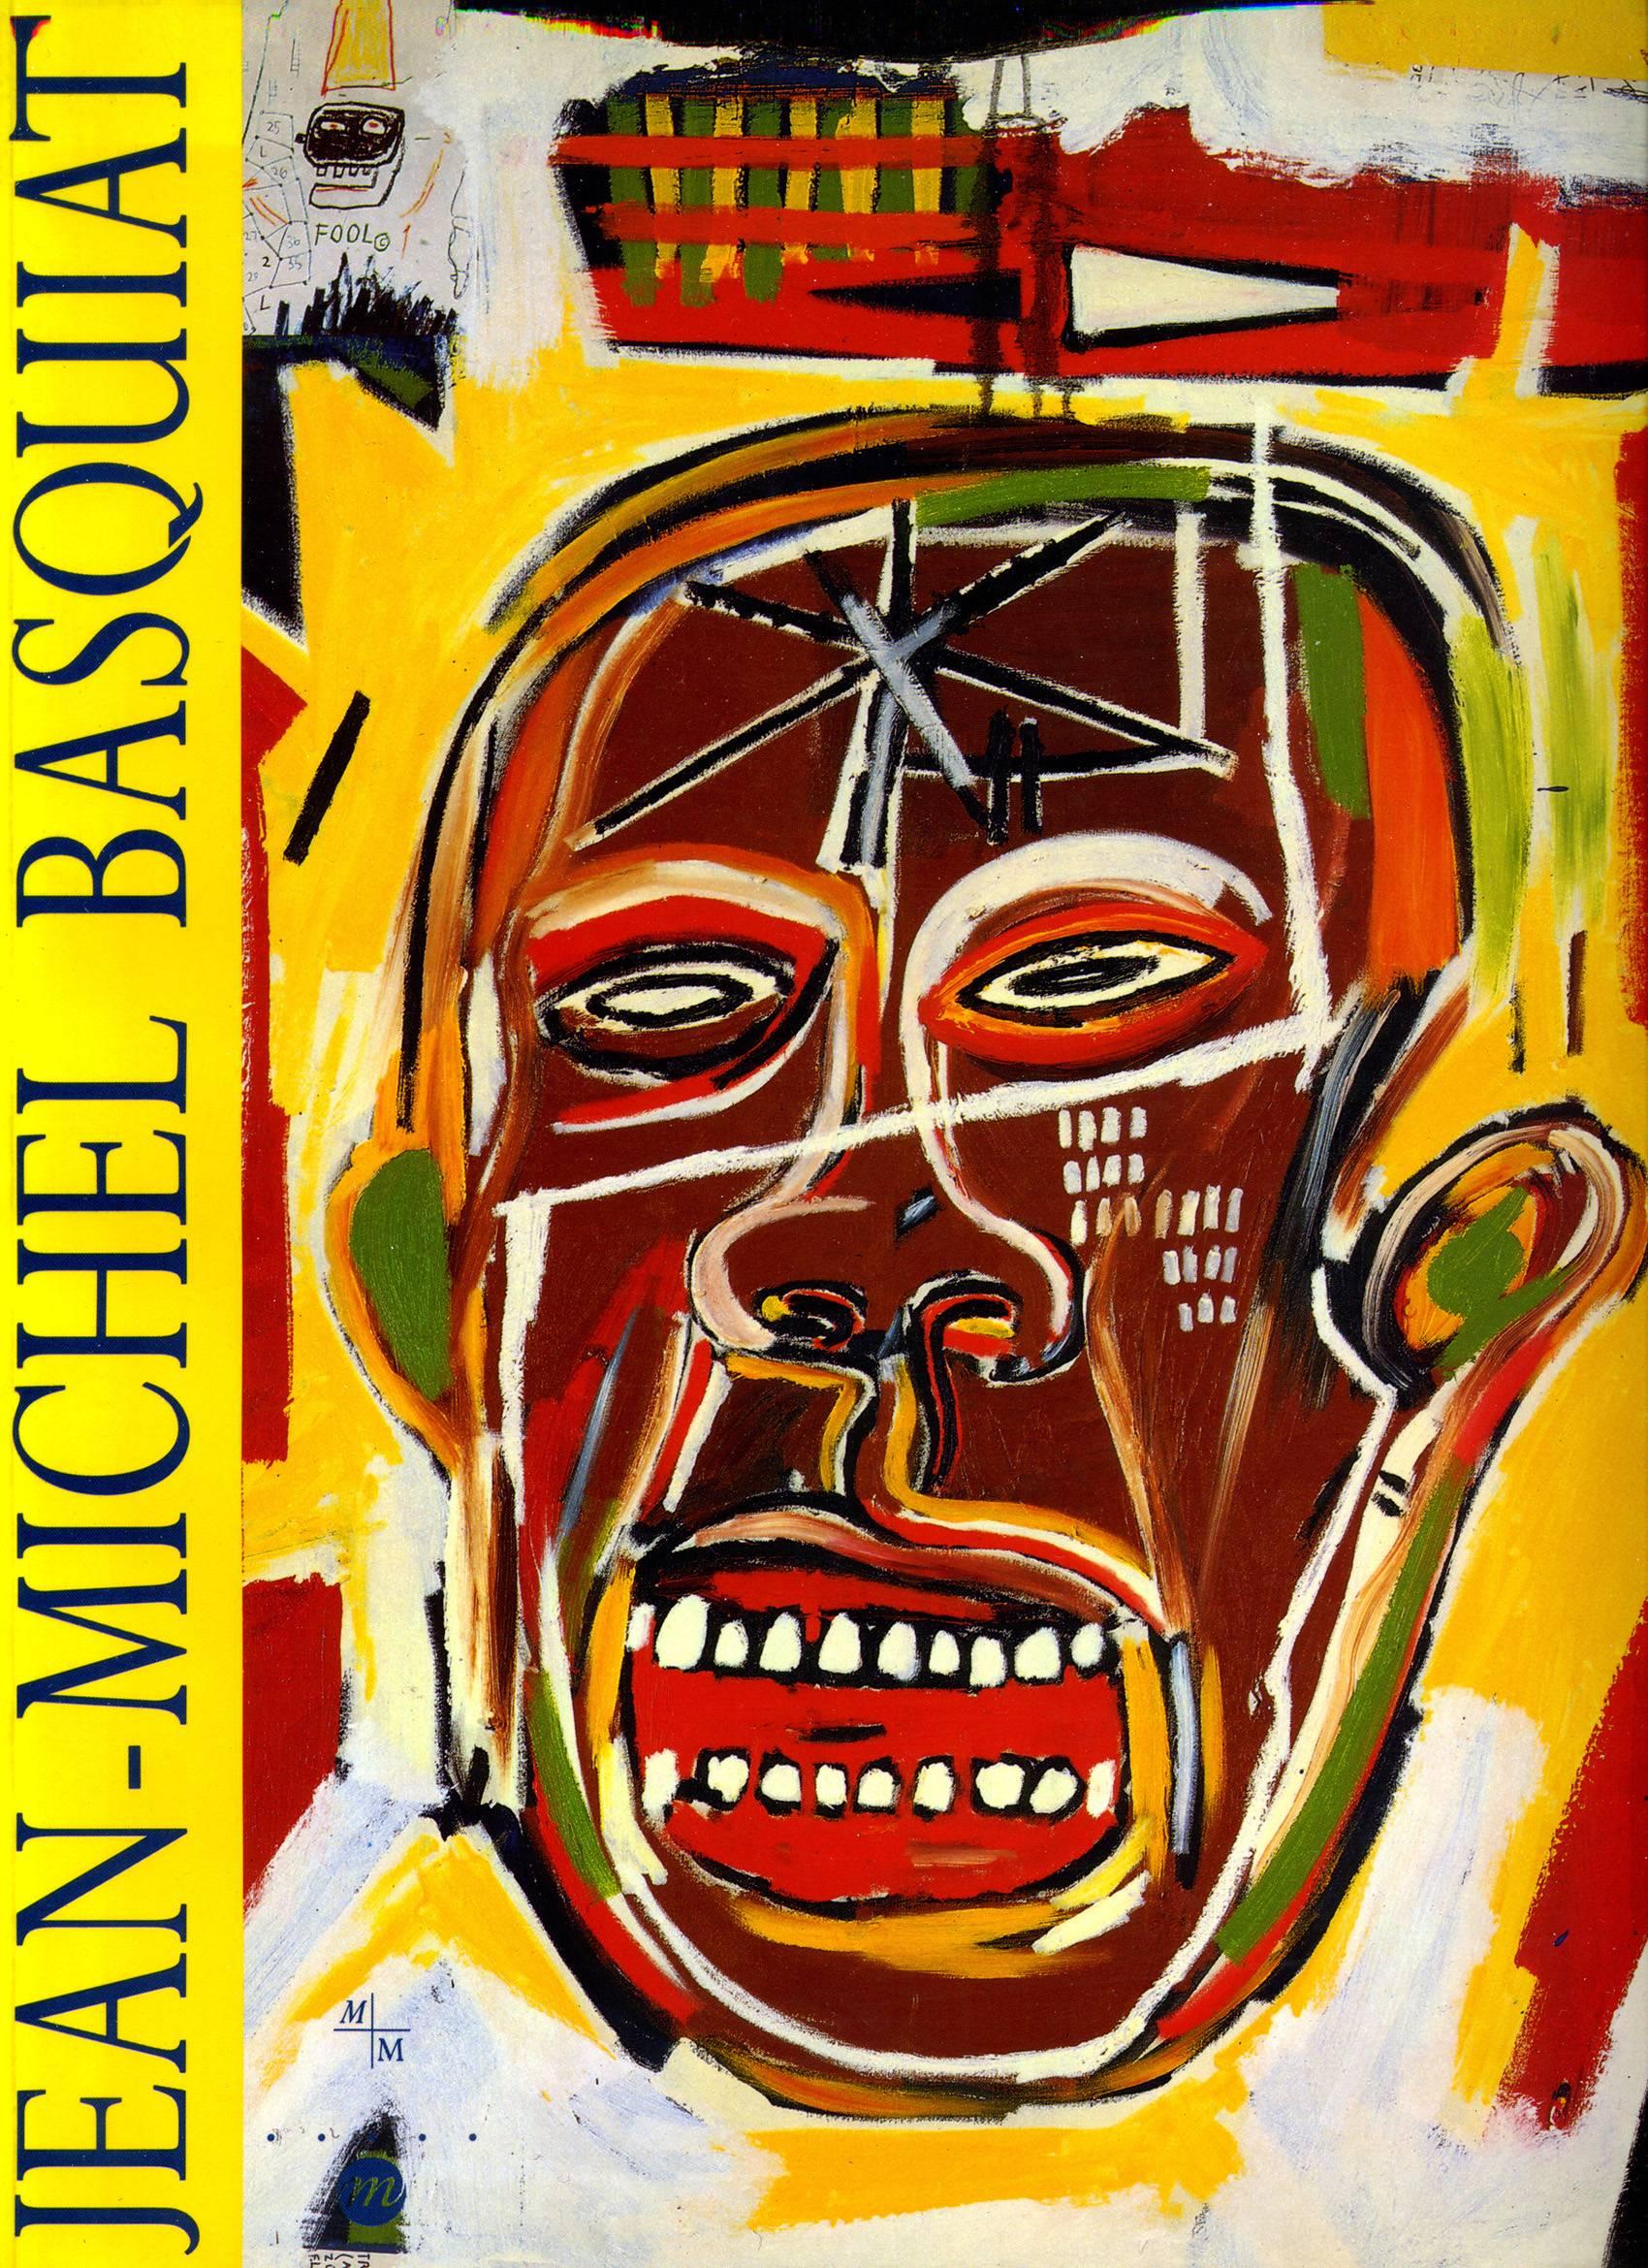 Basquiat Museum Cantini Catalog, Marseille, France - Art by after Jean-Michel Basquiat